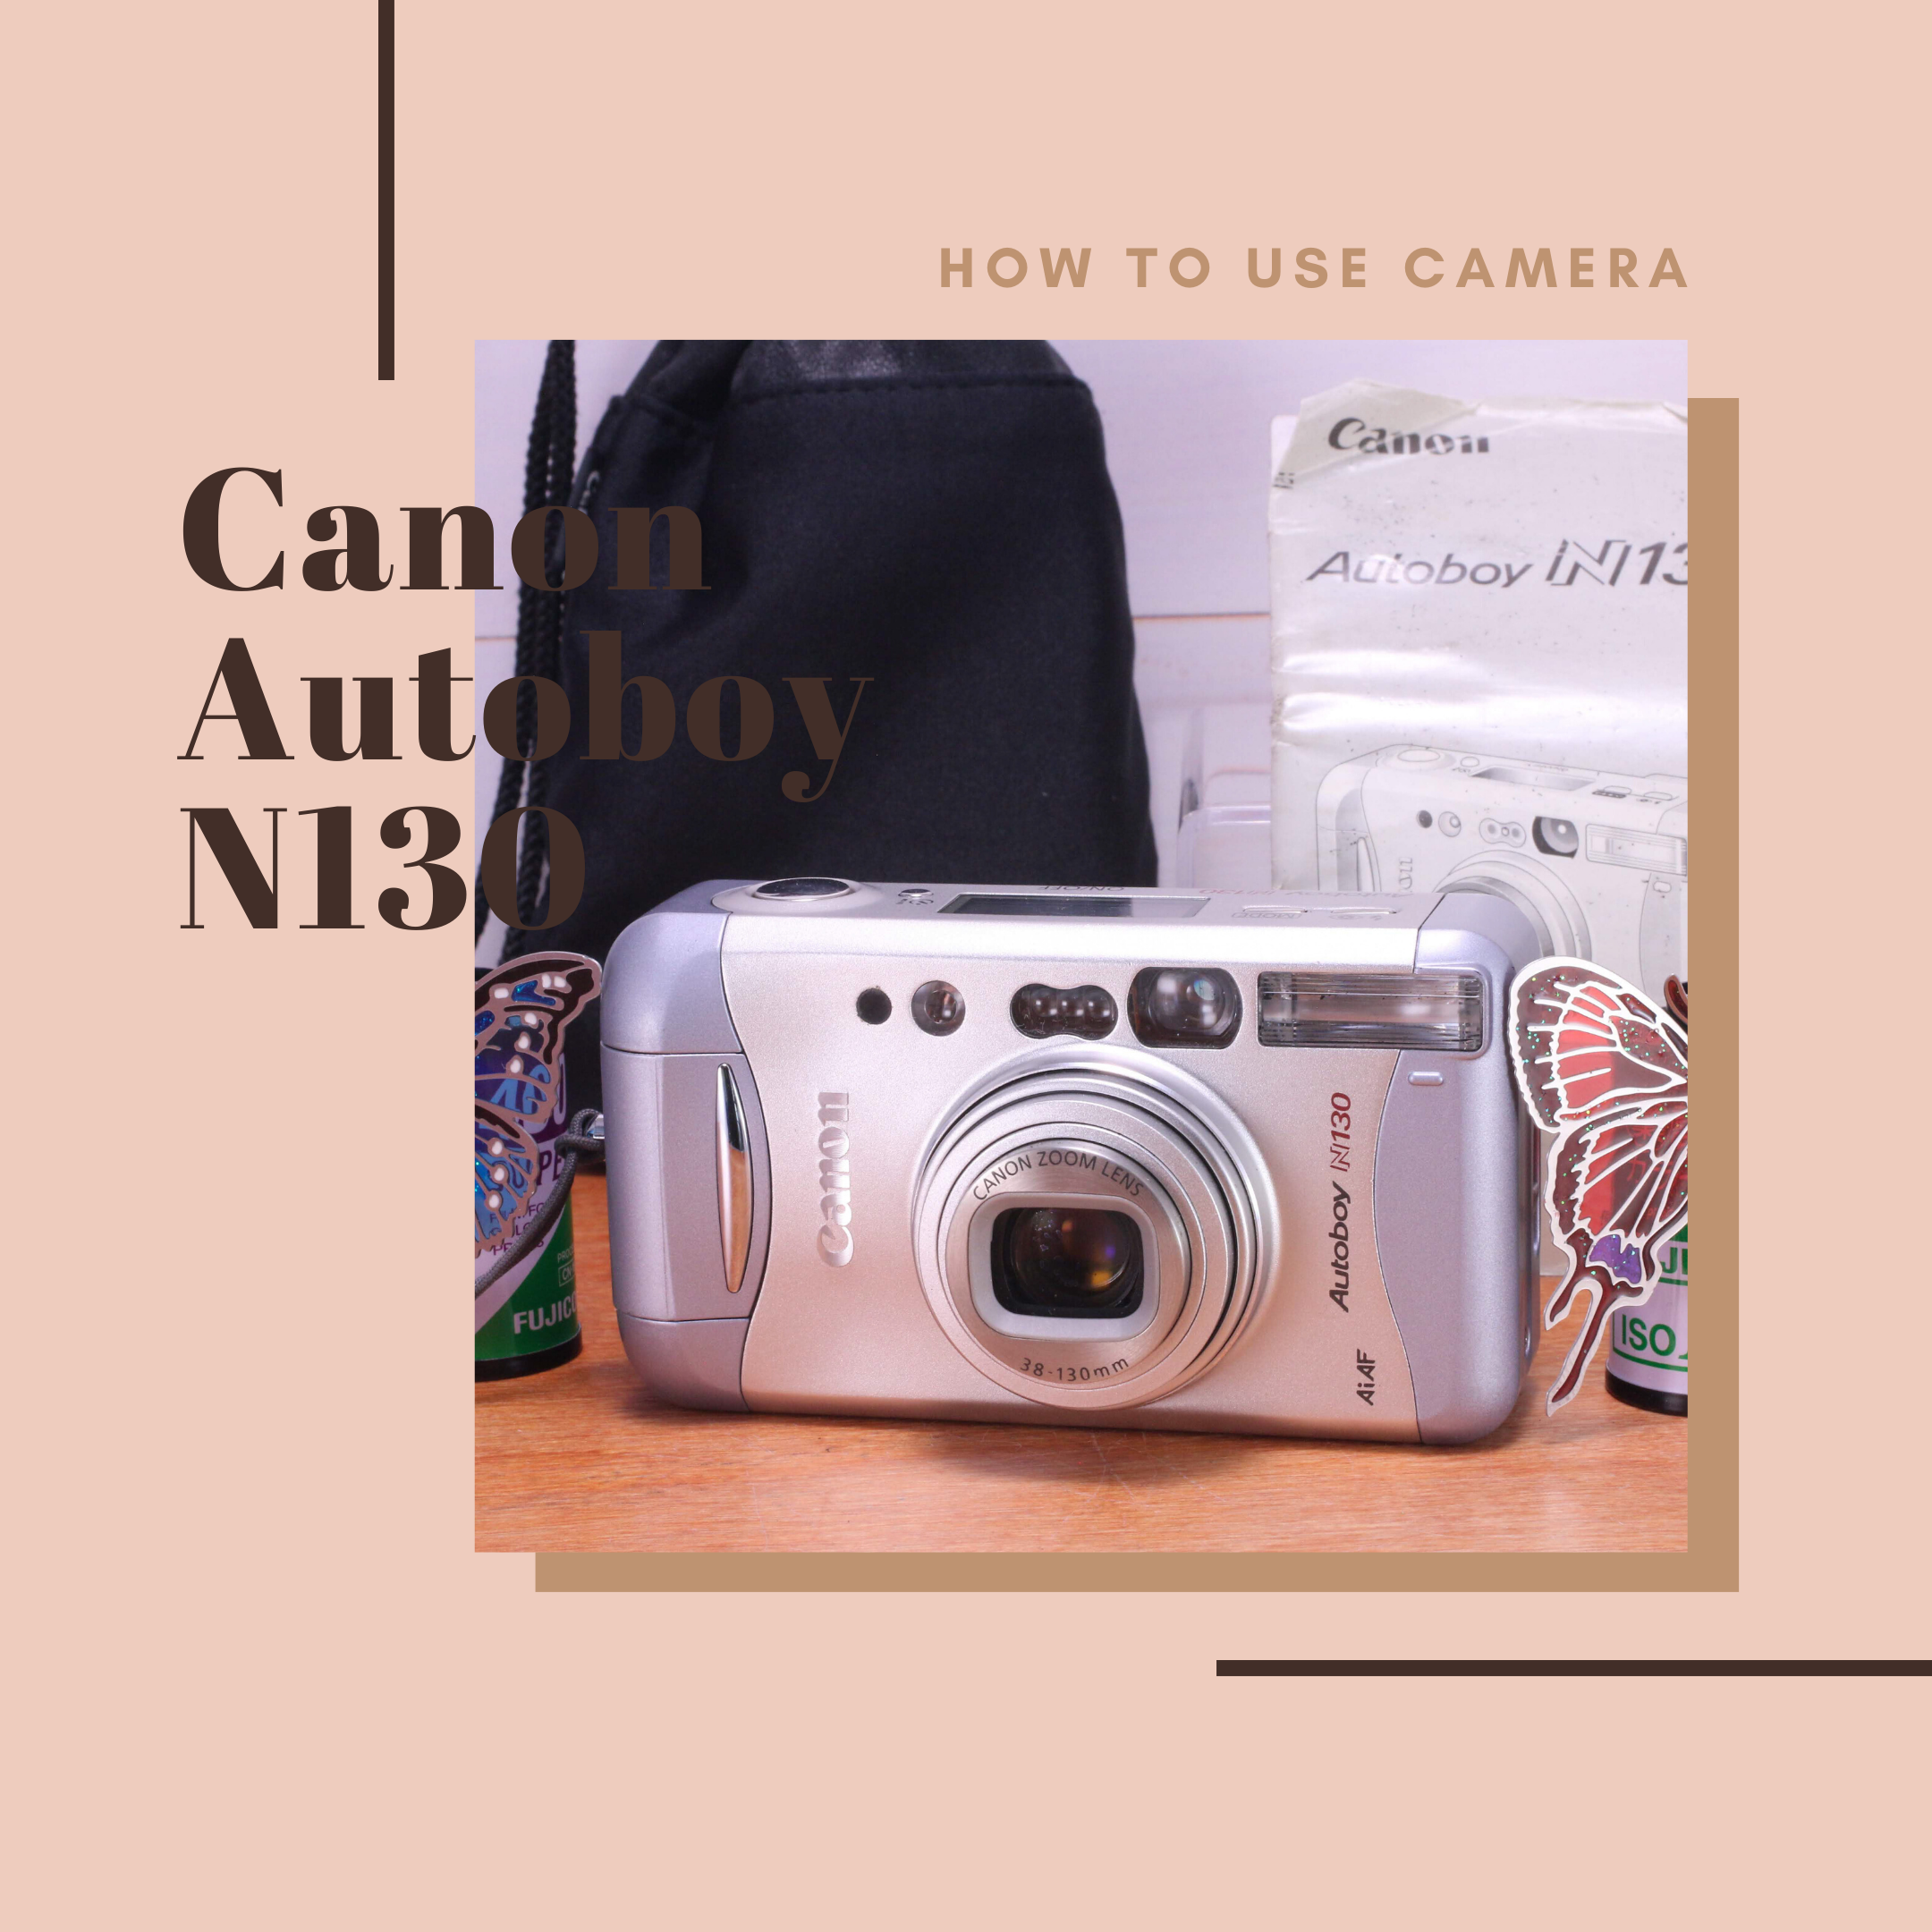 Canon Autoboy N130 の使い方 | Totte Me Camera